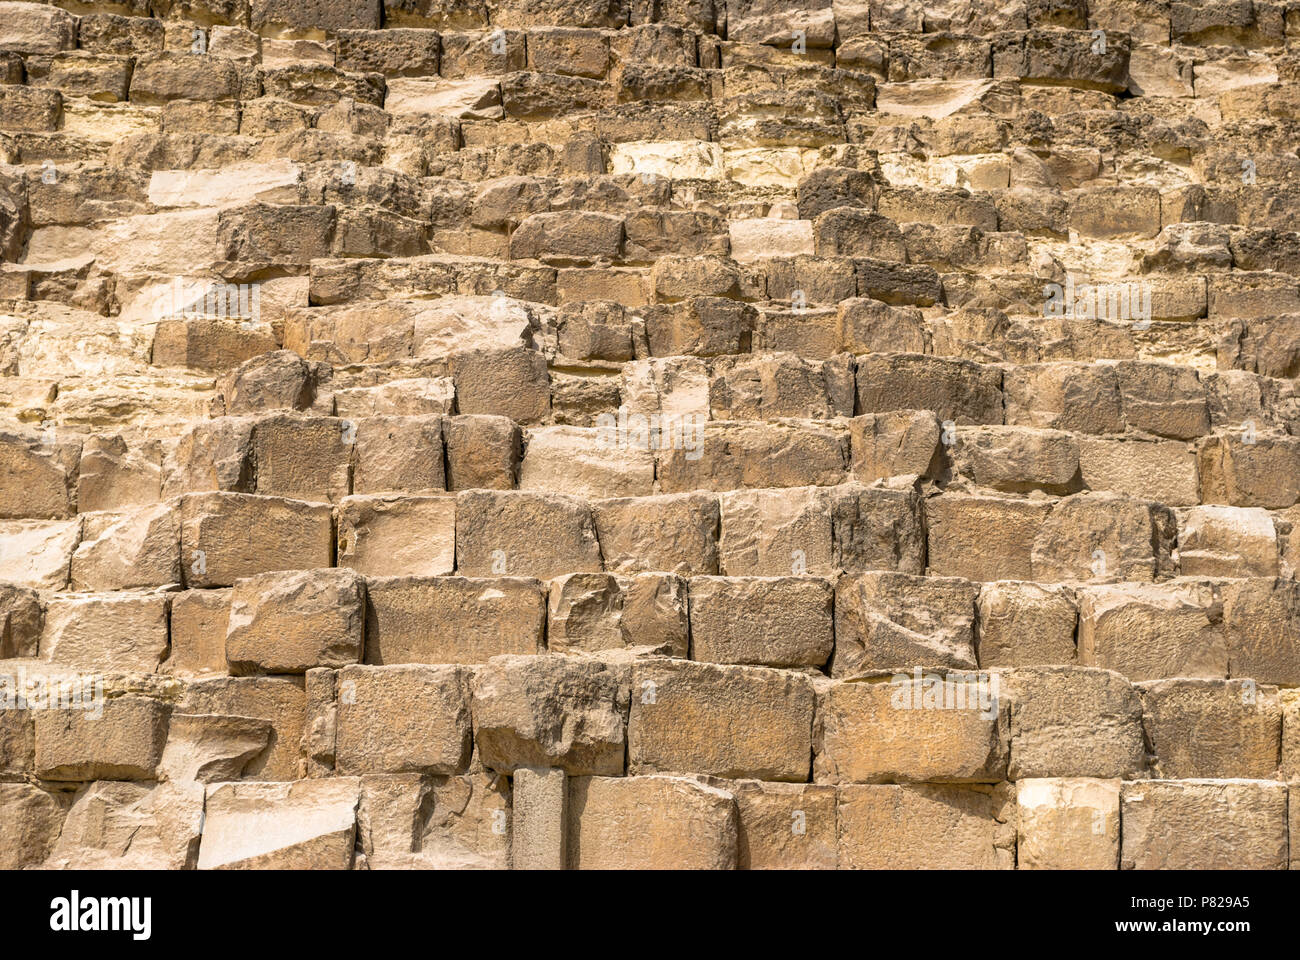 detail of the rocks of the pyramid, Great Pyramid of Giza, Cairo, Egypt Stock Photo